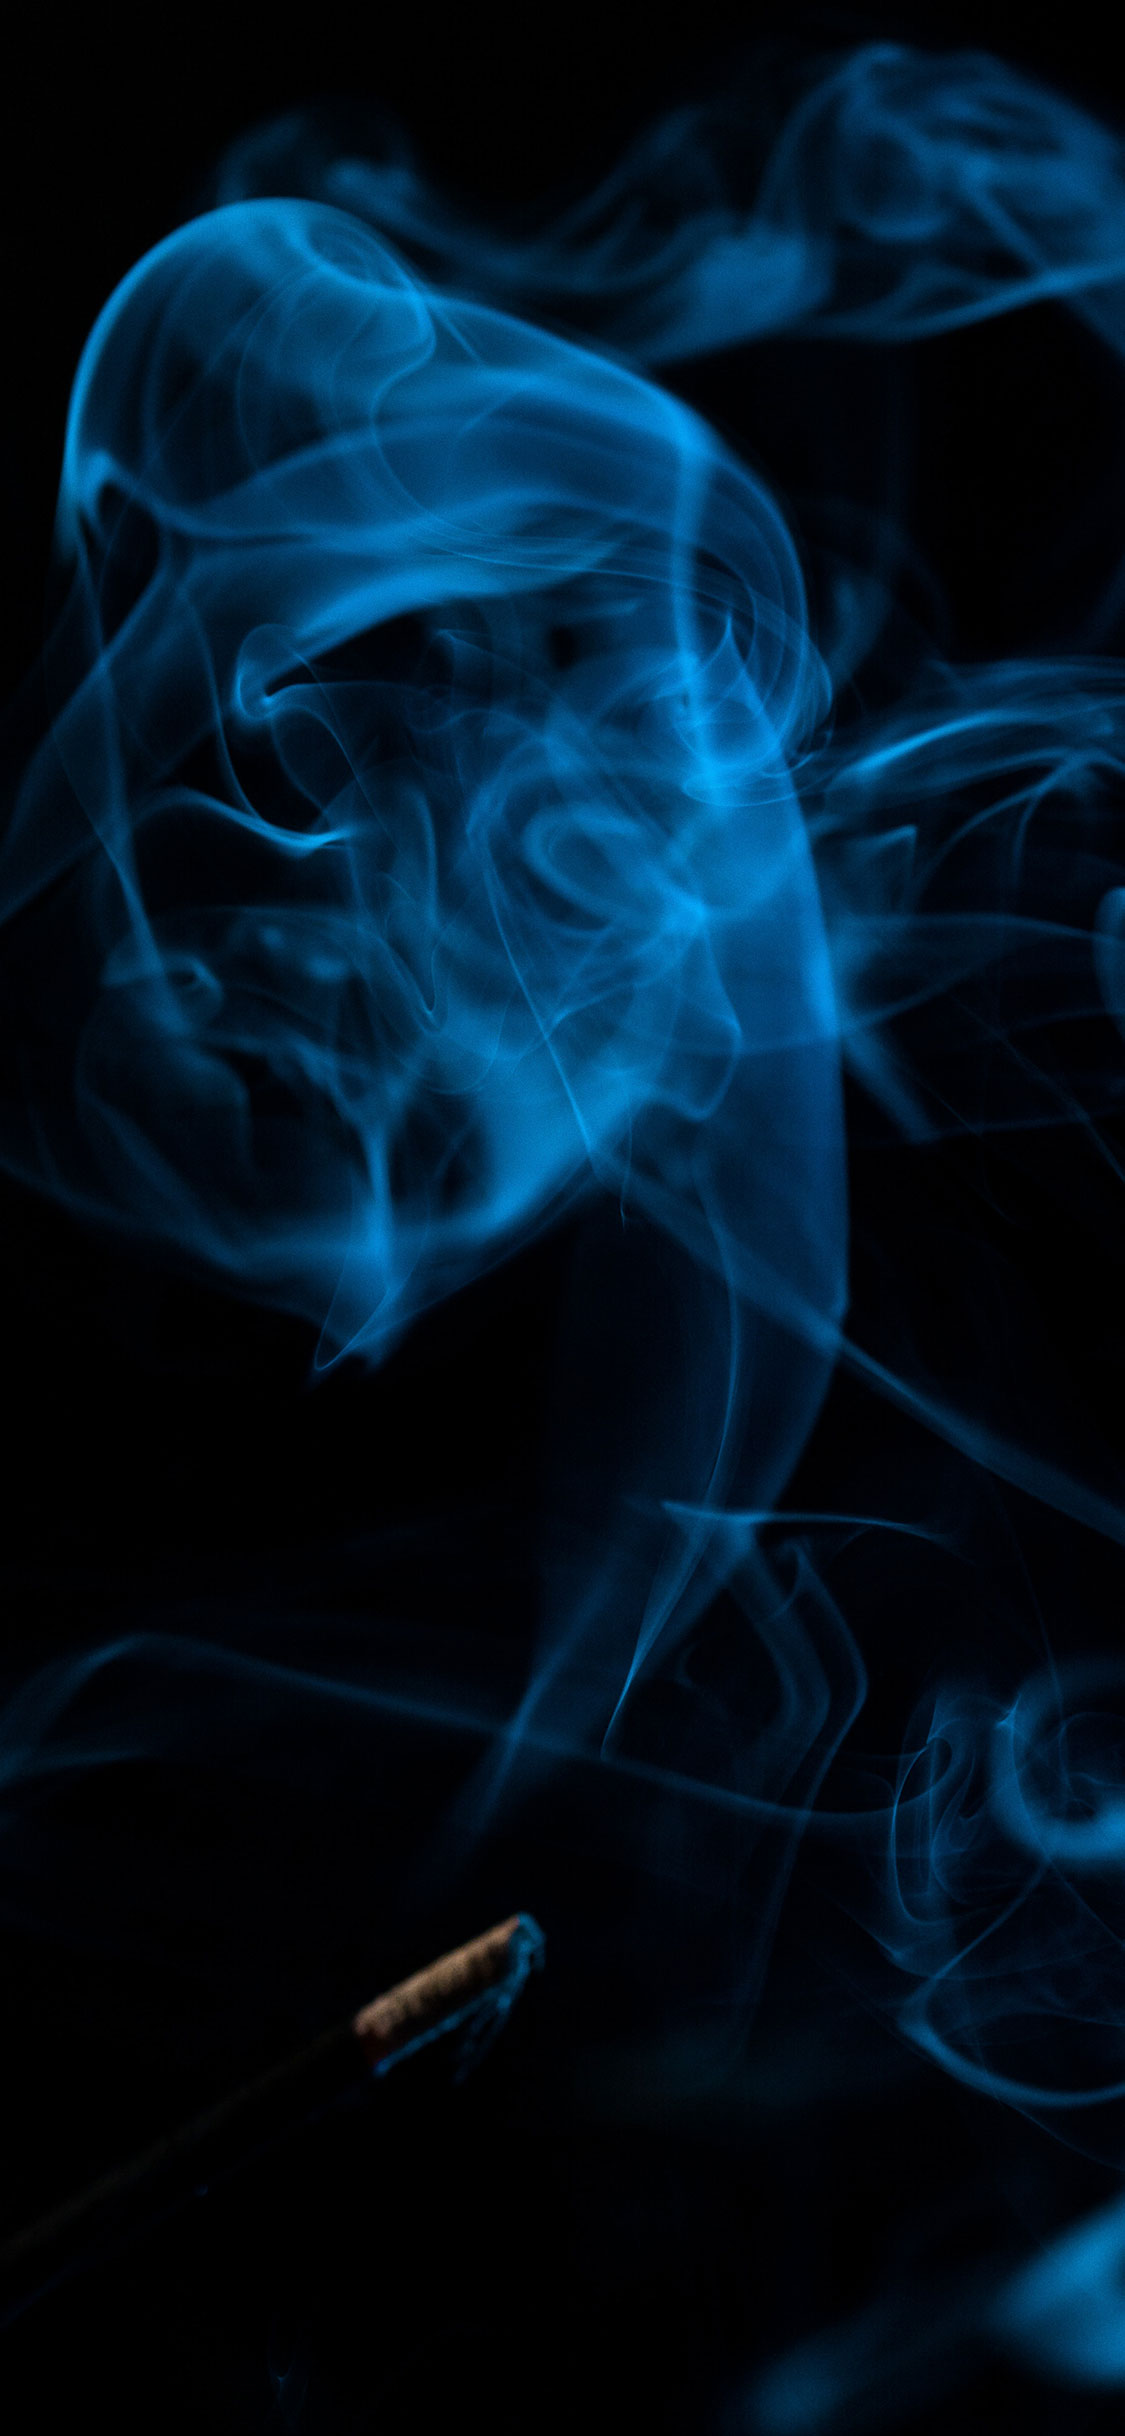 Smoke Wallpaper For iPhone Pro Max X